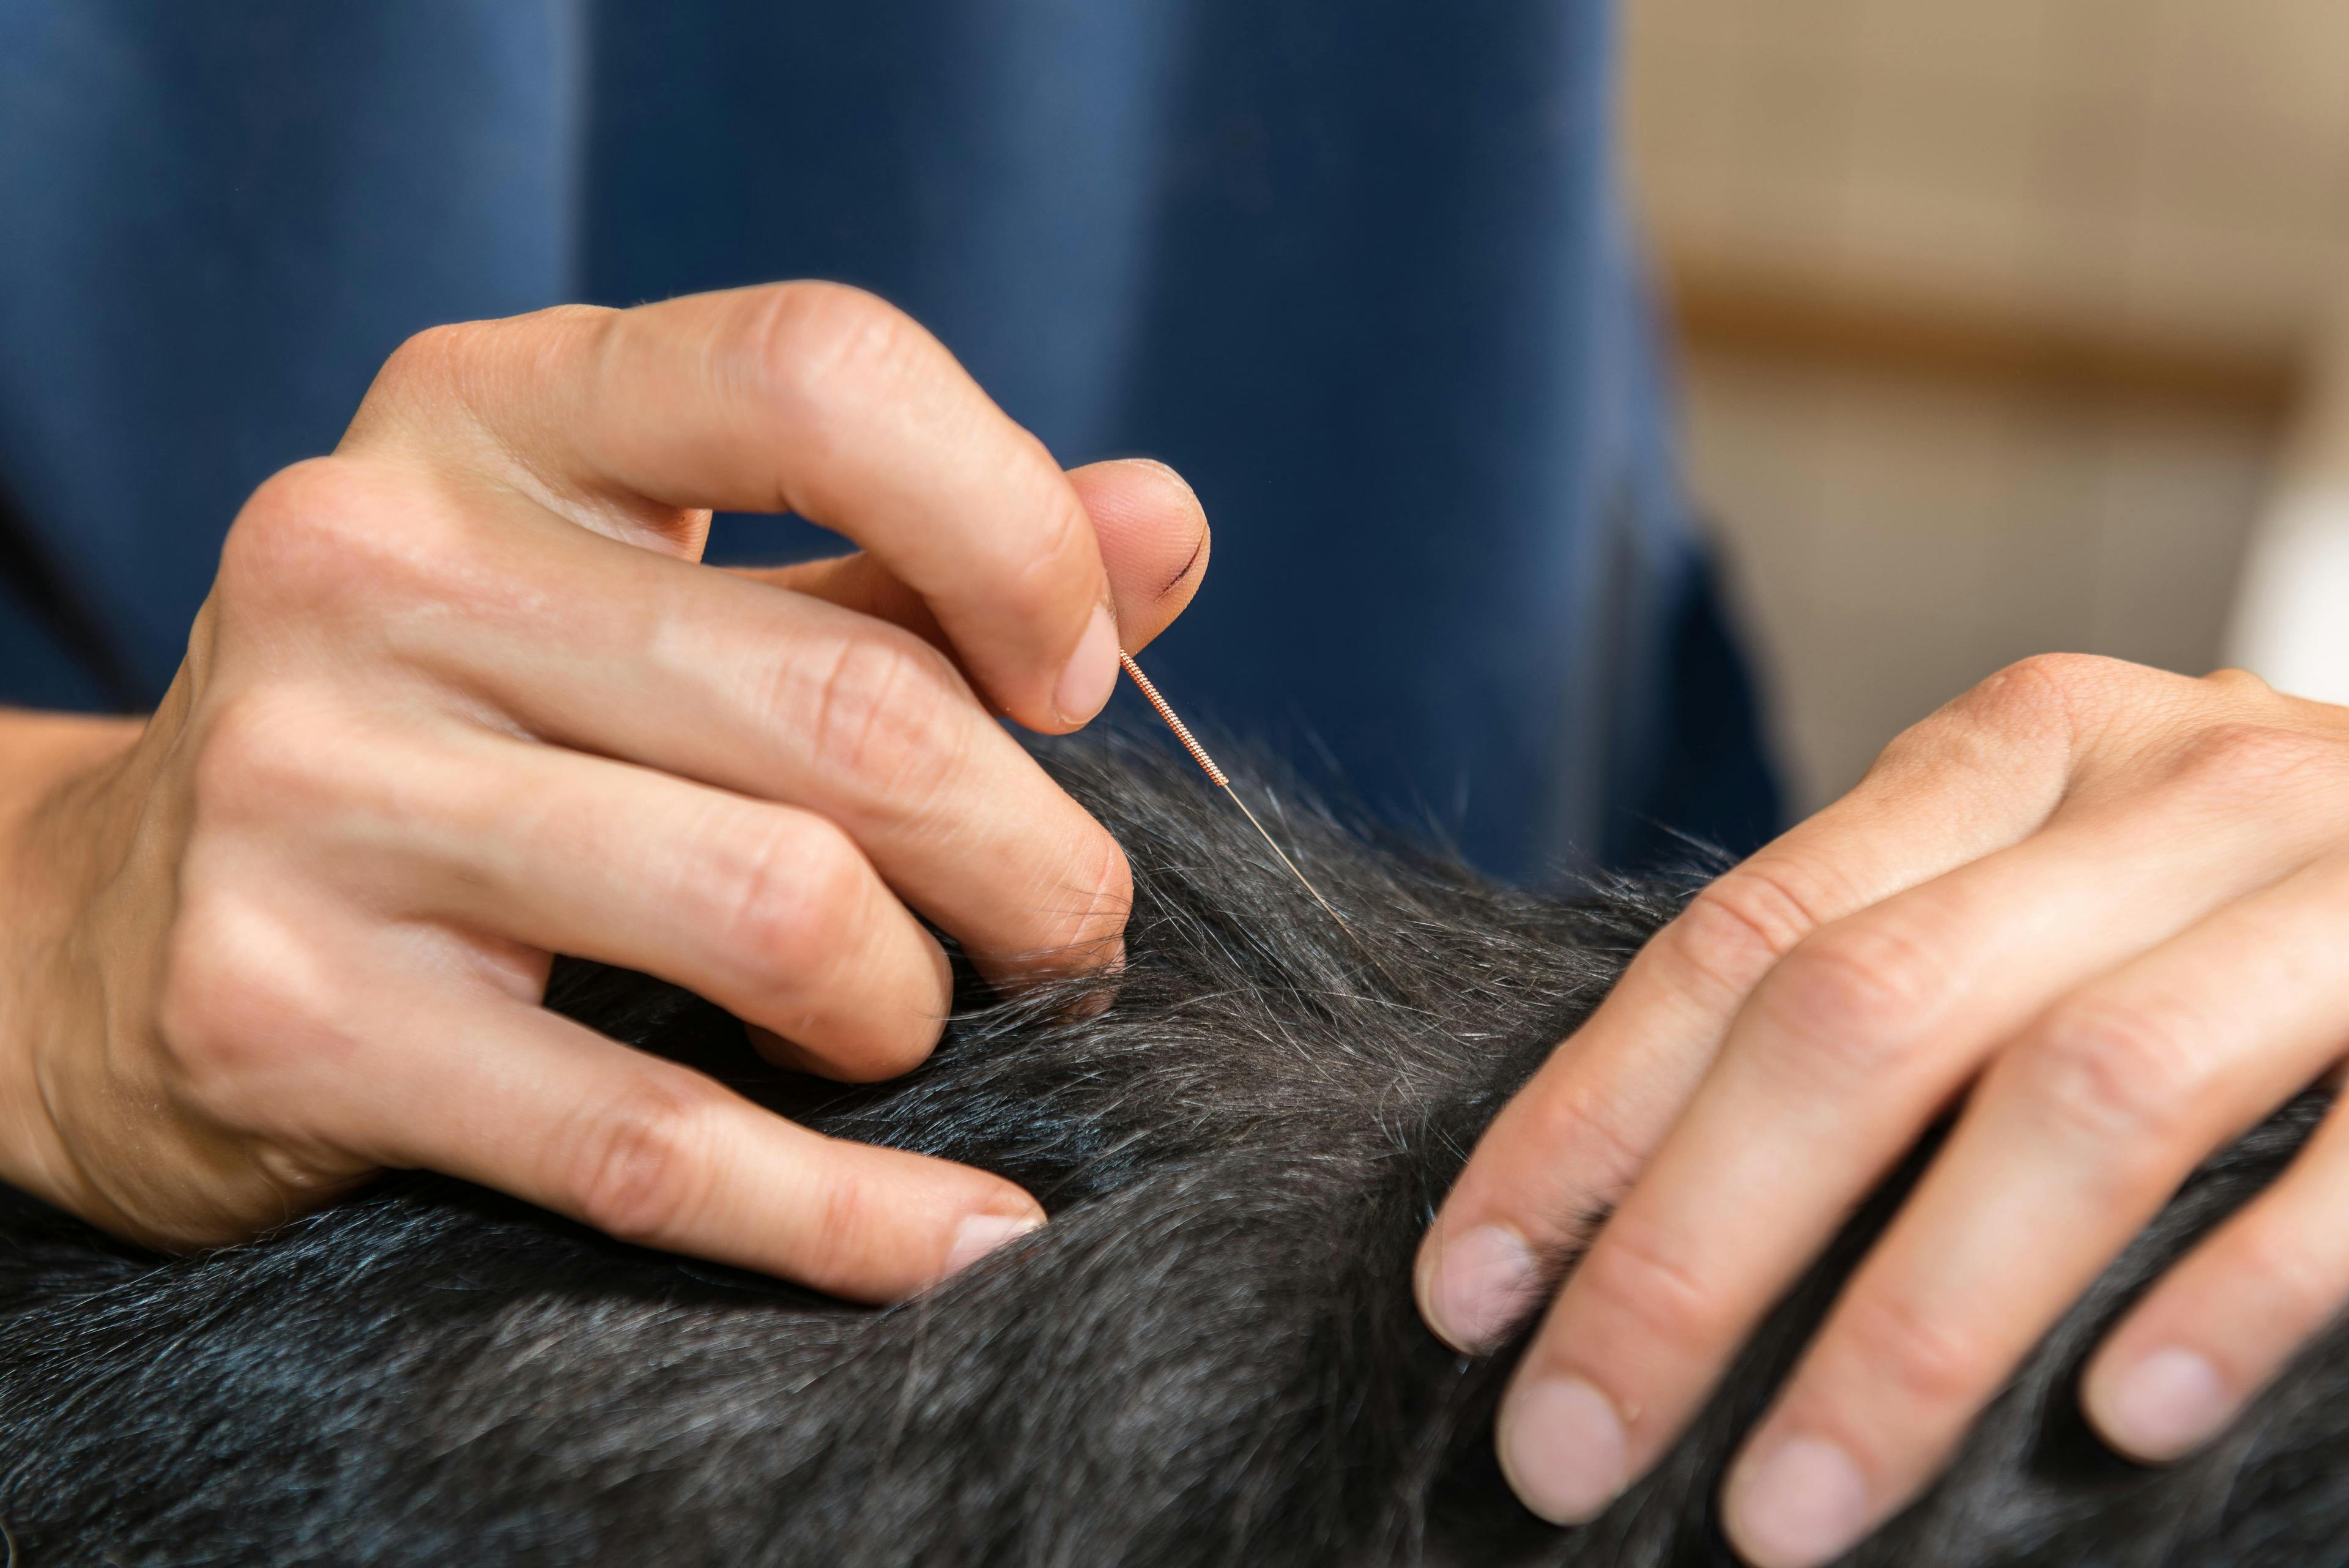 Veterinarian carefully placing acupuncture needles for dog's comfort.